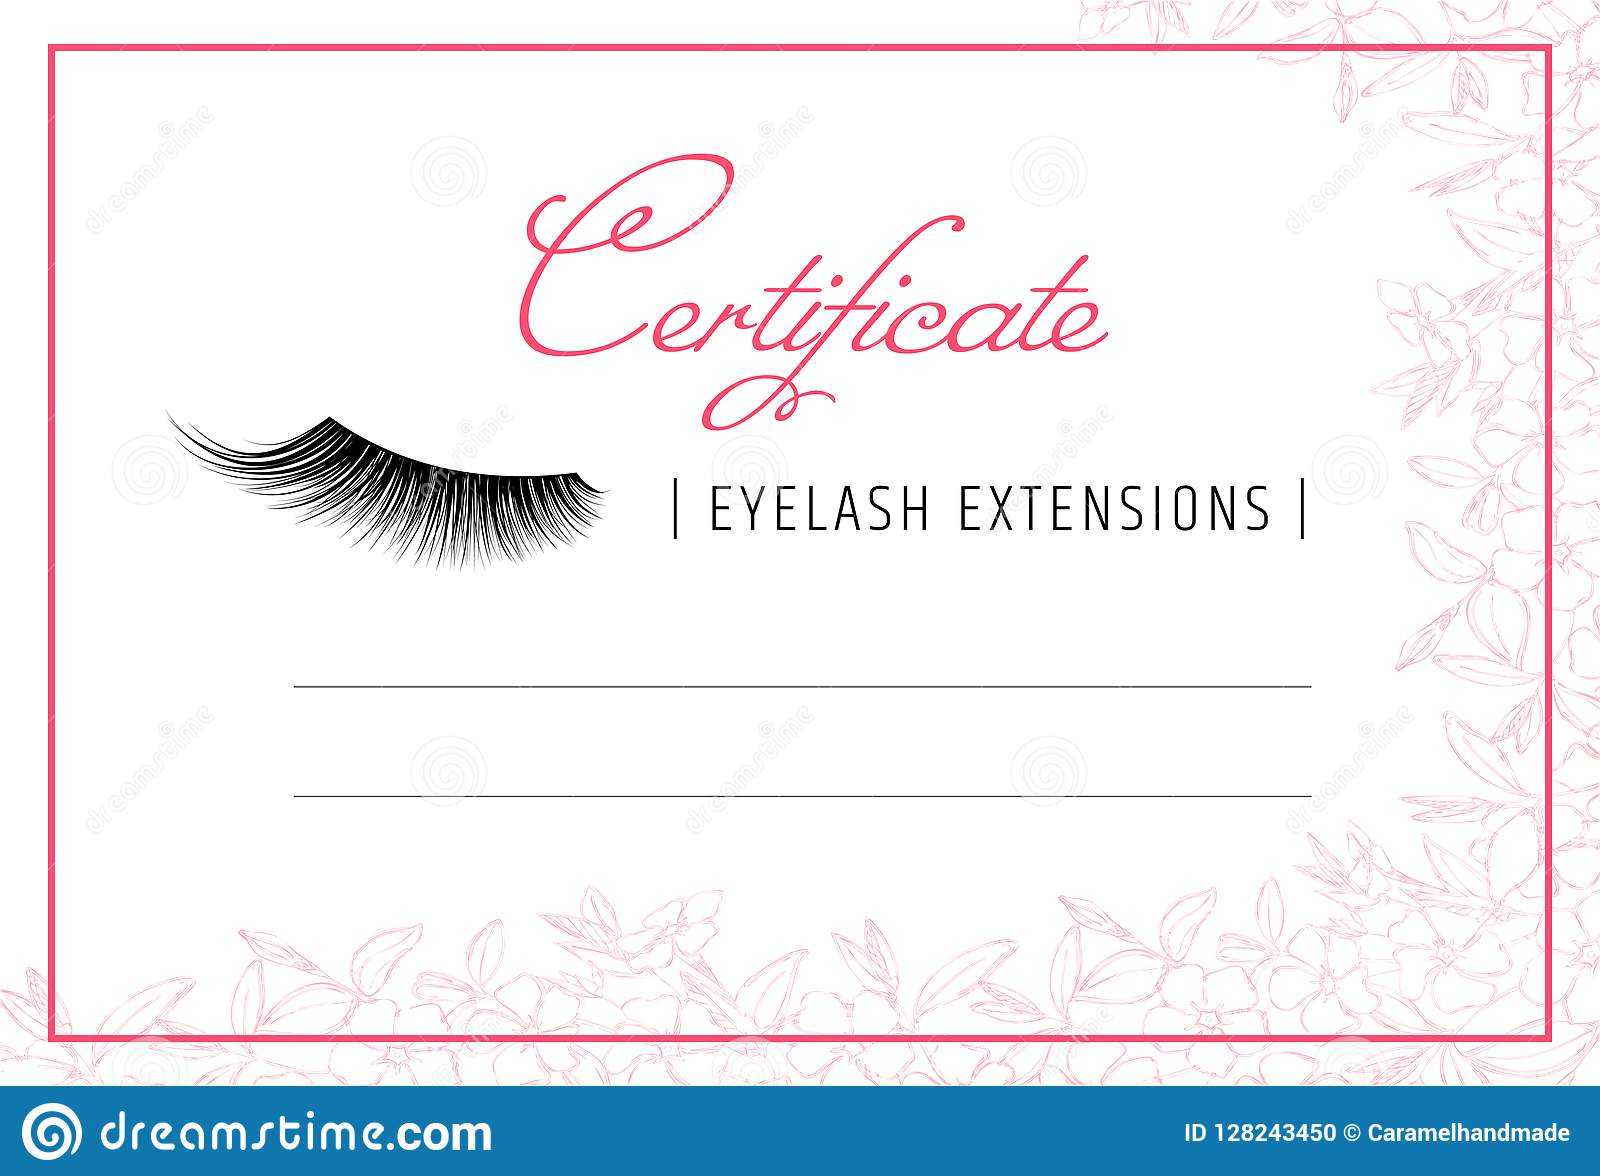 Diploma Eyelash Extensions. Makeup Certificate Template Pertaining To School Certificate Templates Free